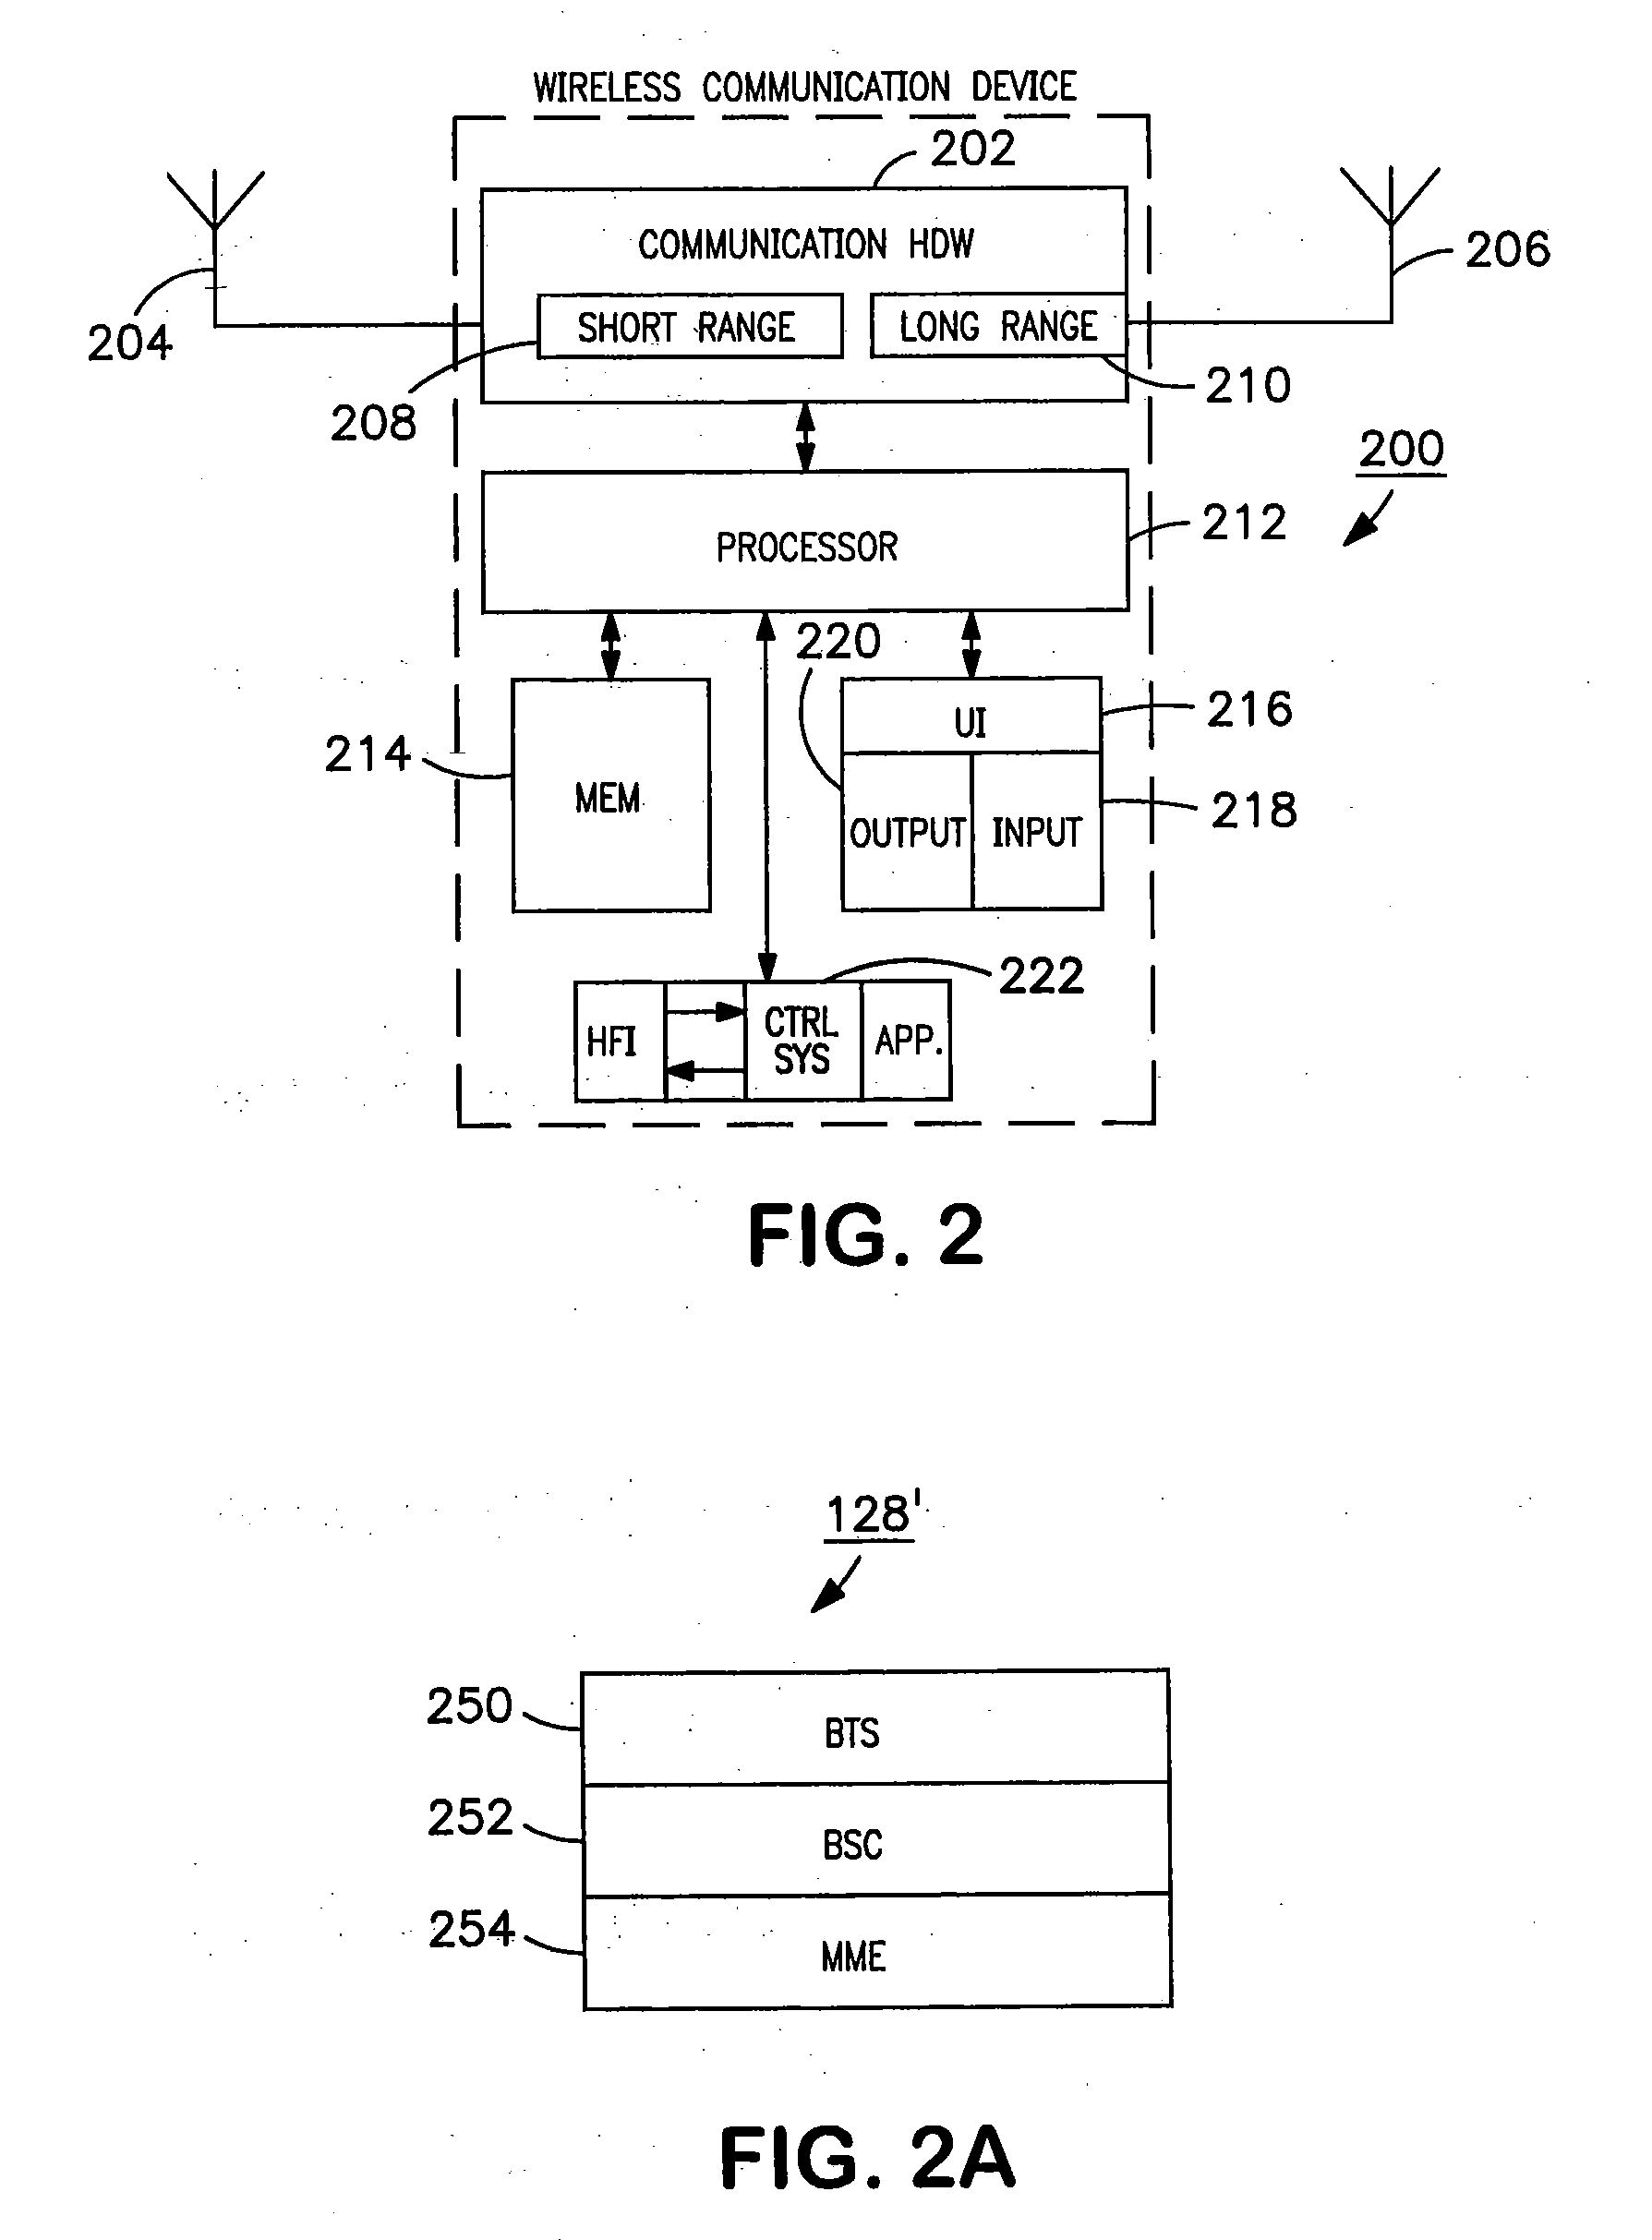 Managing attachment of a wireless terminal to local area networks